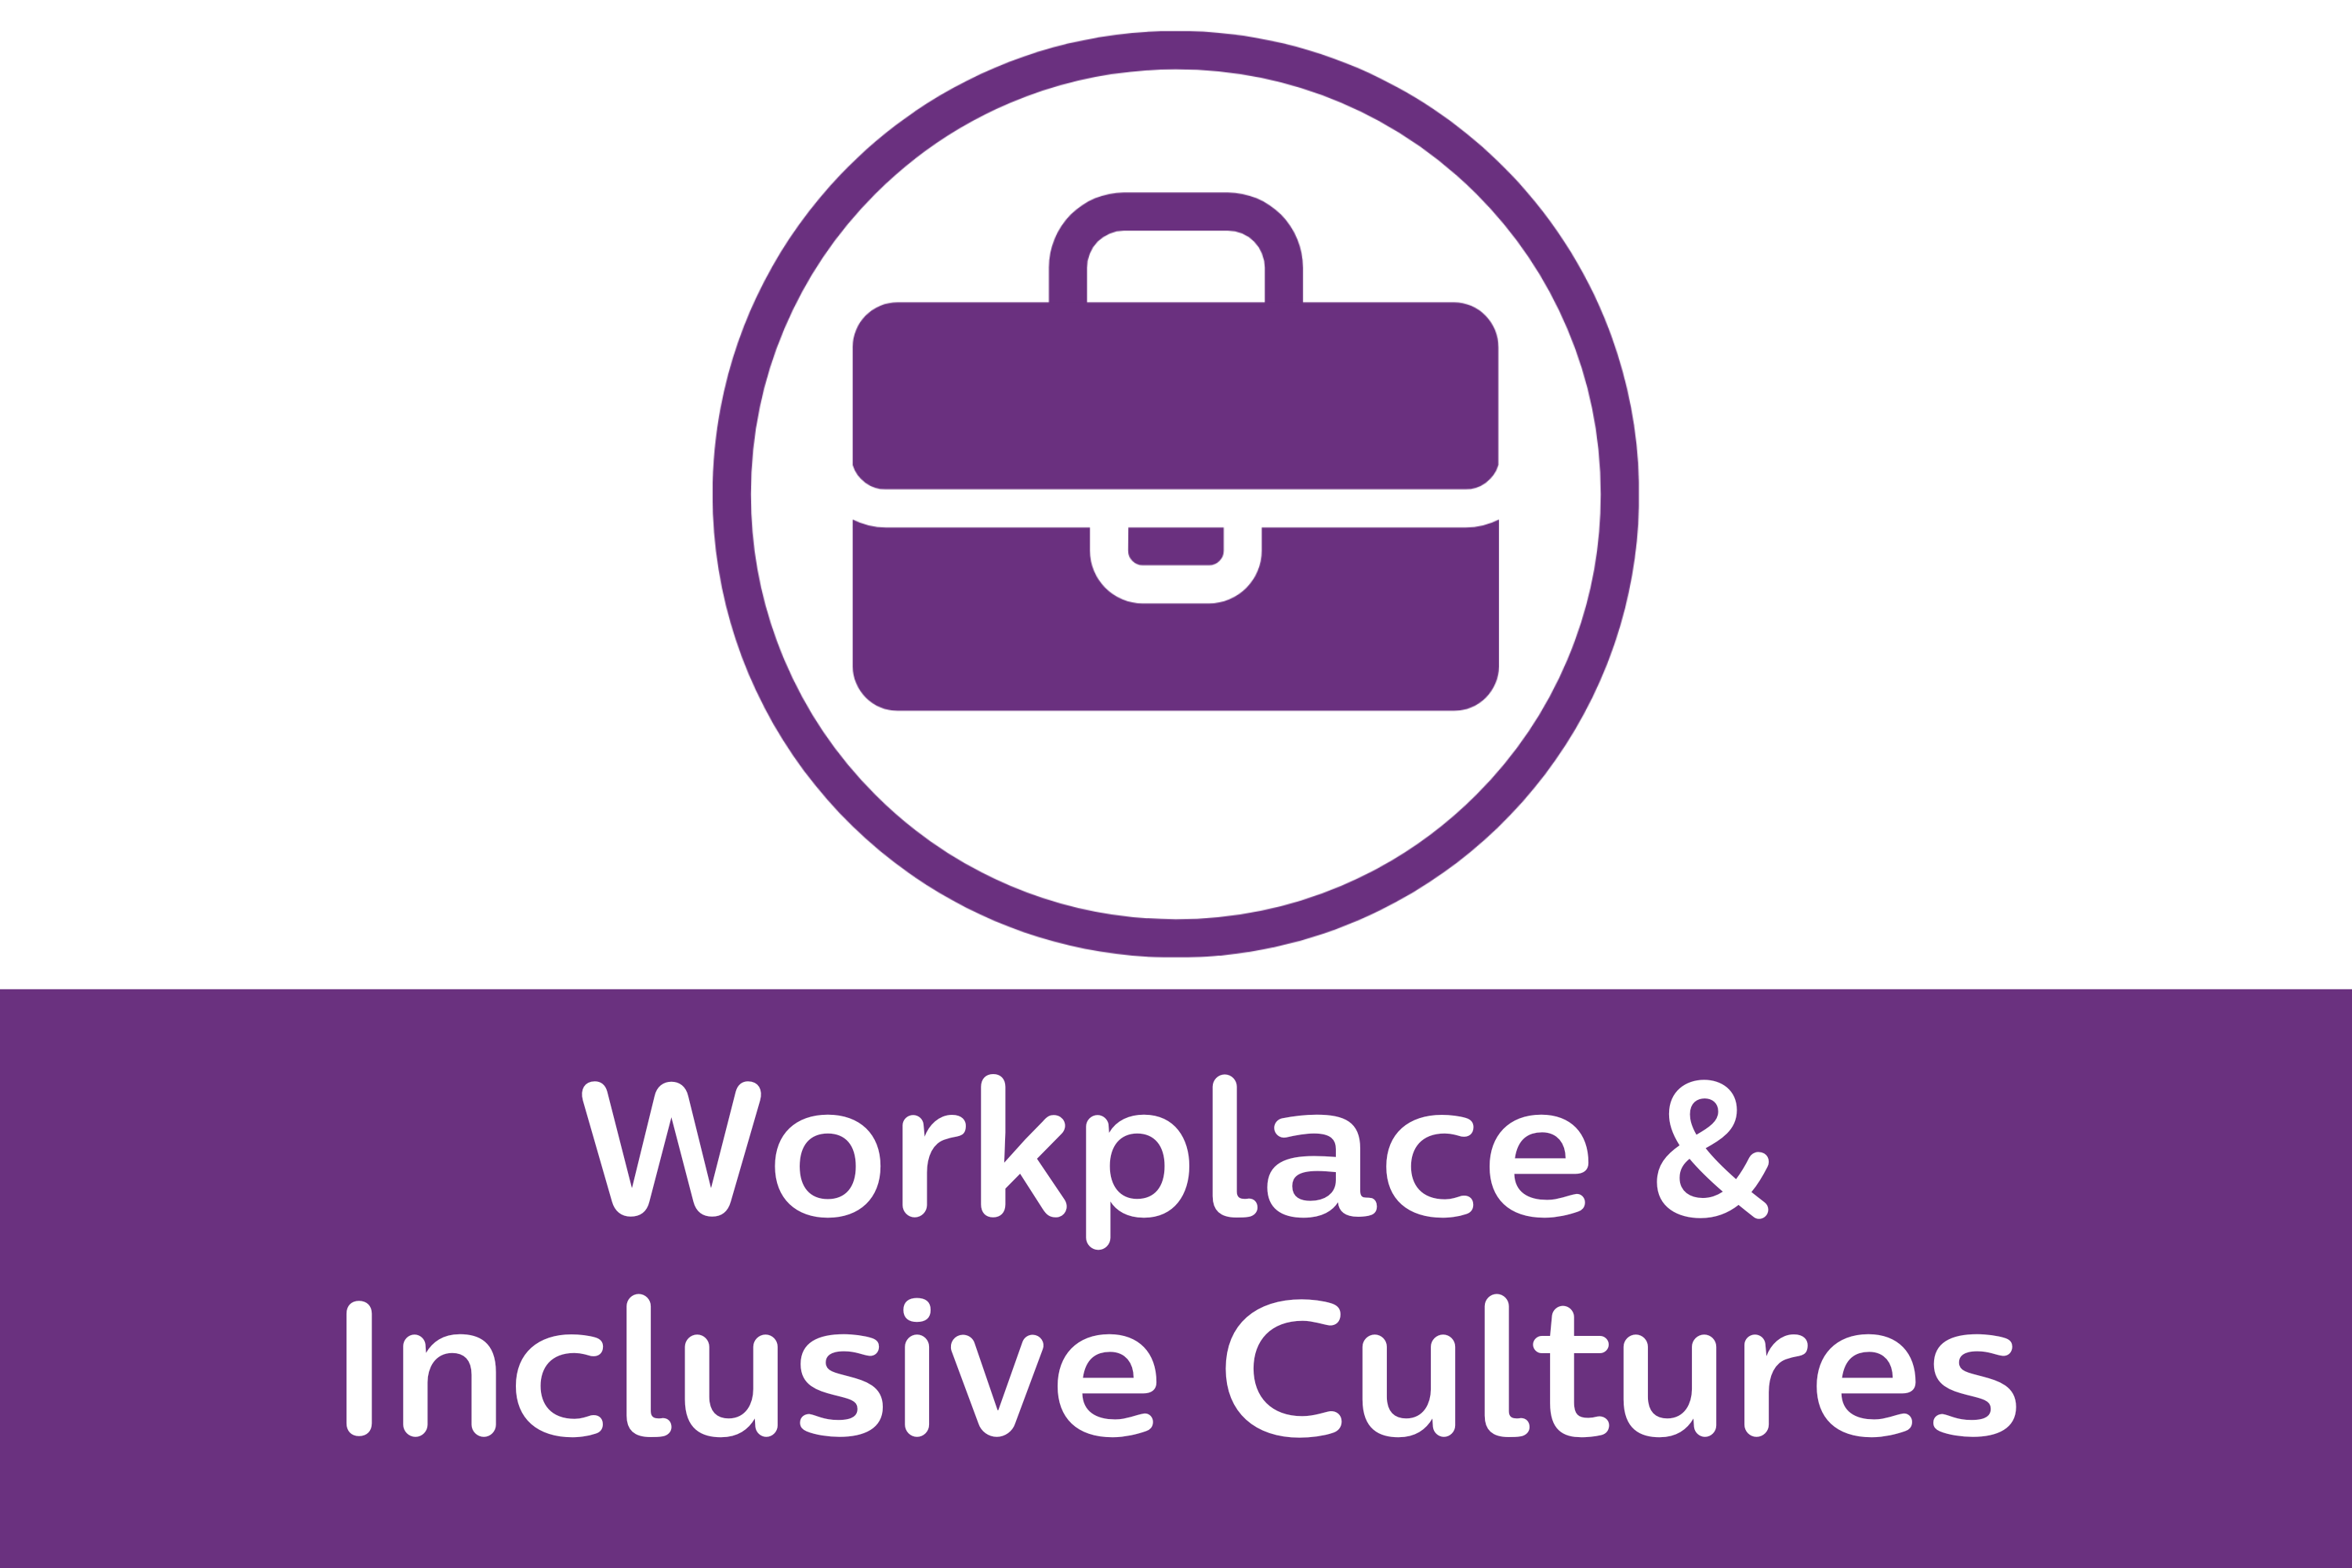 Workplace & Inclusive Cultures Priority Action Areas